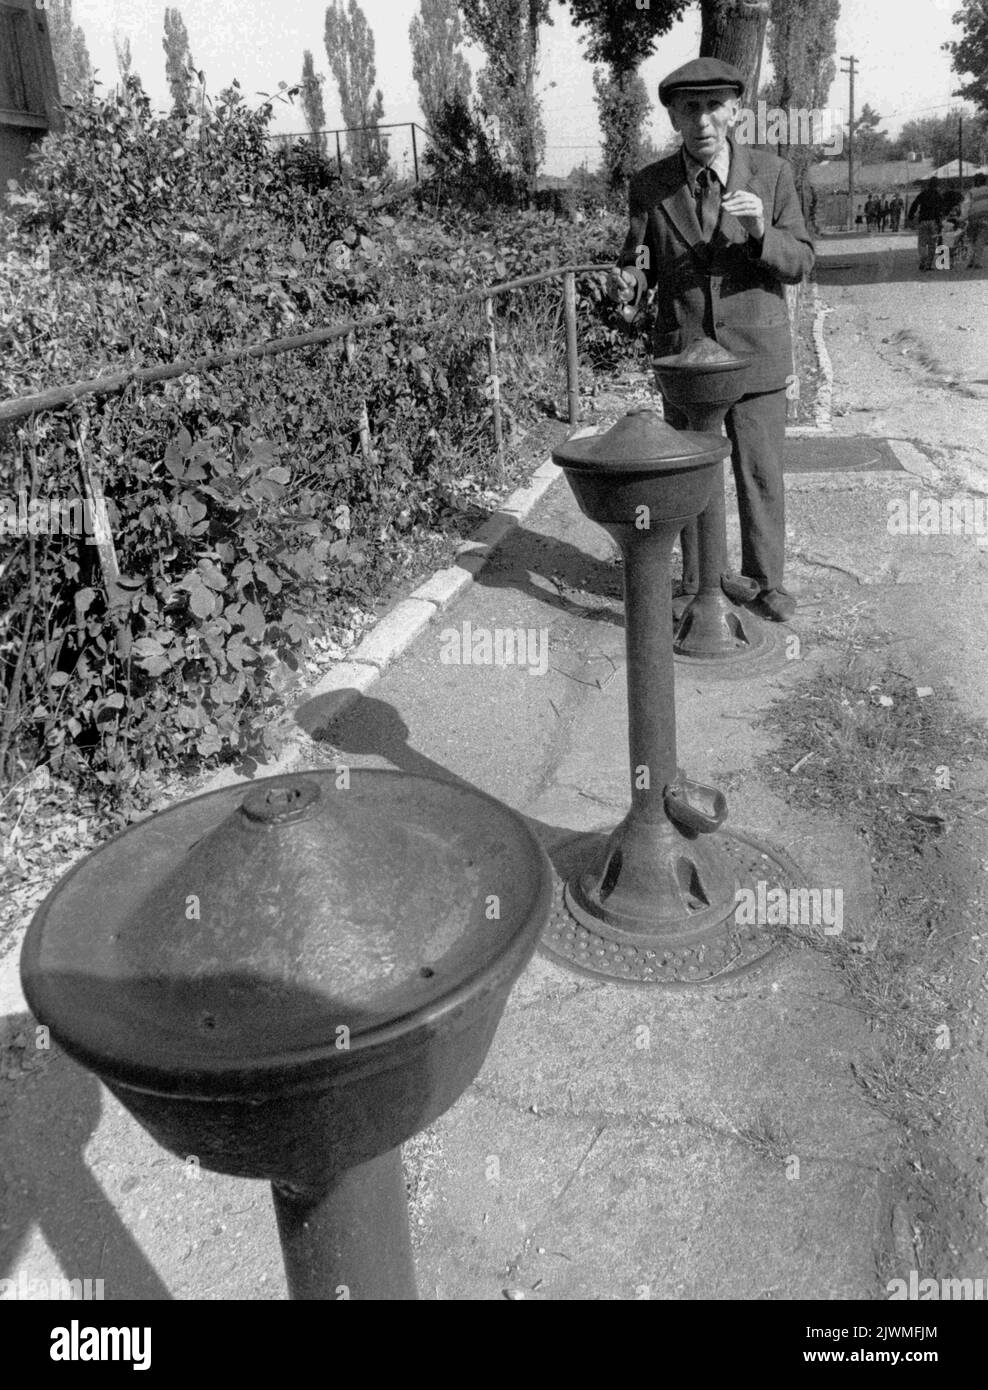 Bucharest, Romania, 1990. Man in front of a water fountain on the street. Stock Photo